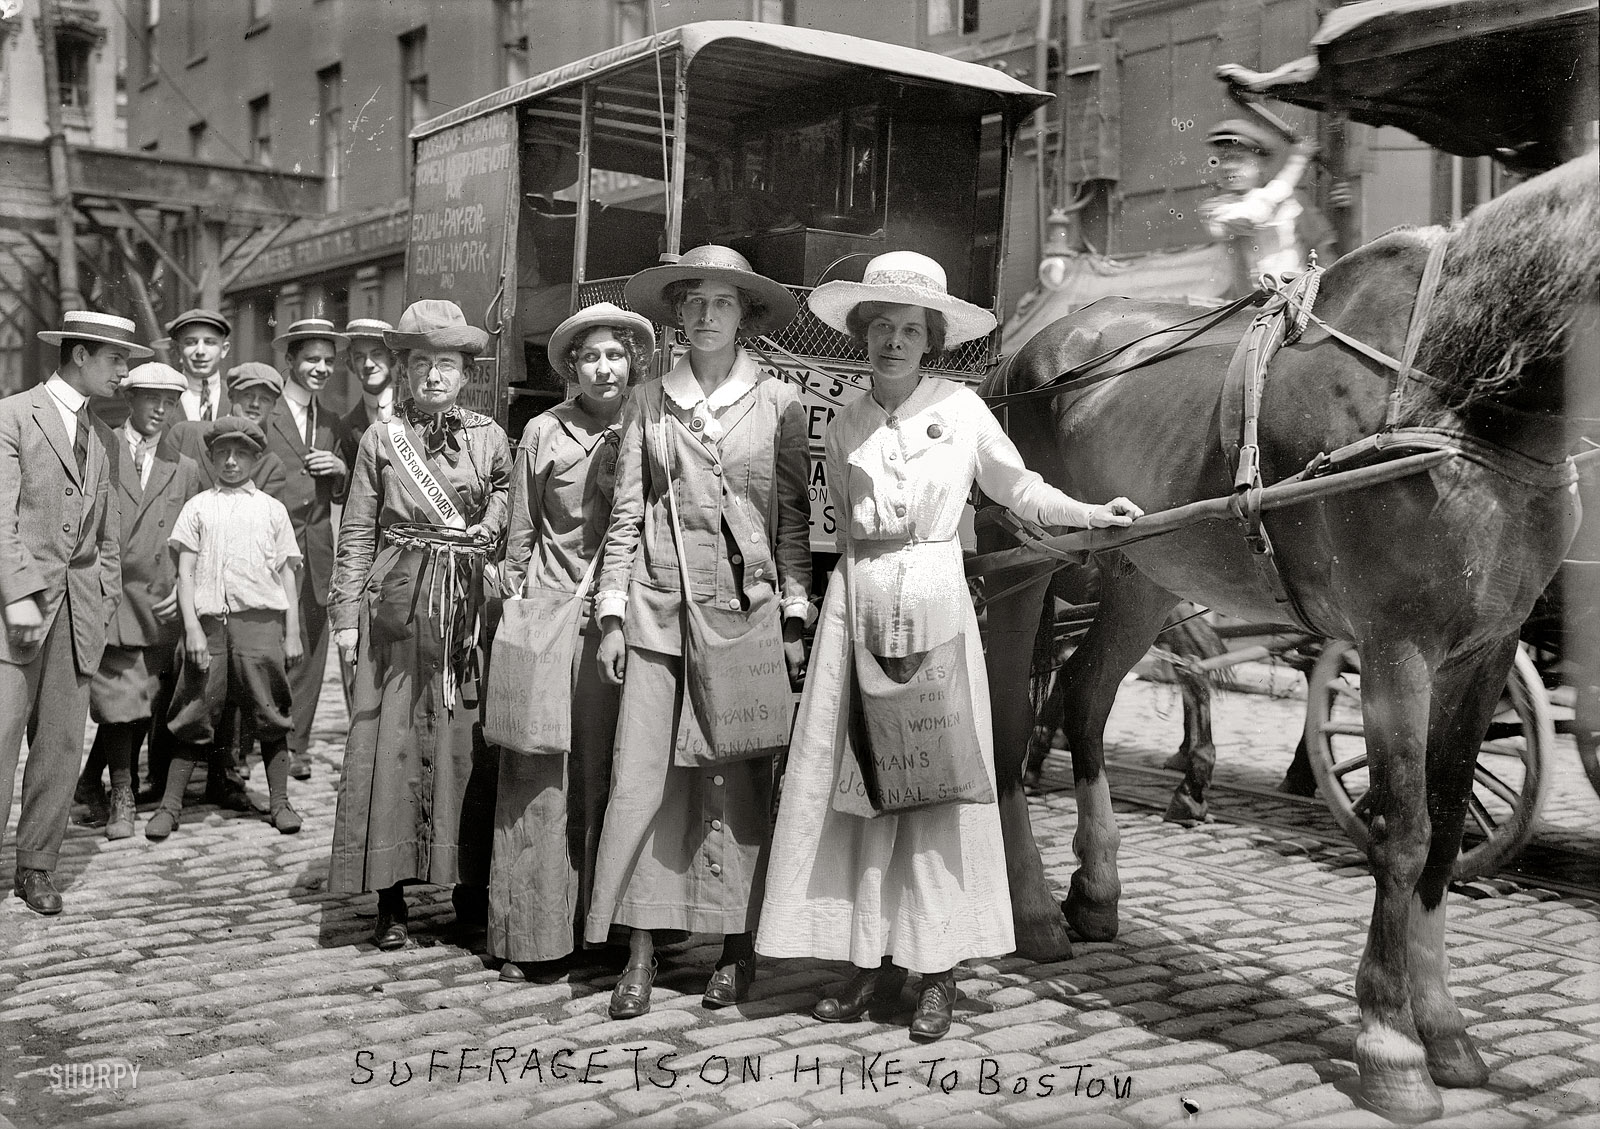 New York, August 1913. "Suffragettes on hike to Boston." Our third look at the suffrage caravan. On the right in white is Elizabeth Freeman, probably with her fellow suffragist travelers Elsie MacKenzie and Vera Wentworth. The lady with the sash might be Elizabeth Worth Mueller, their chaperon. The horse, if it's the same one who conveyed Elizabeth on a previous escapade, was a steed of artistic temperament (he liked sunsets and the color yellow) named Lausanne, who cost $59.98. 5x7 glass negative, George Grantham Bain Collection. View full size.